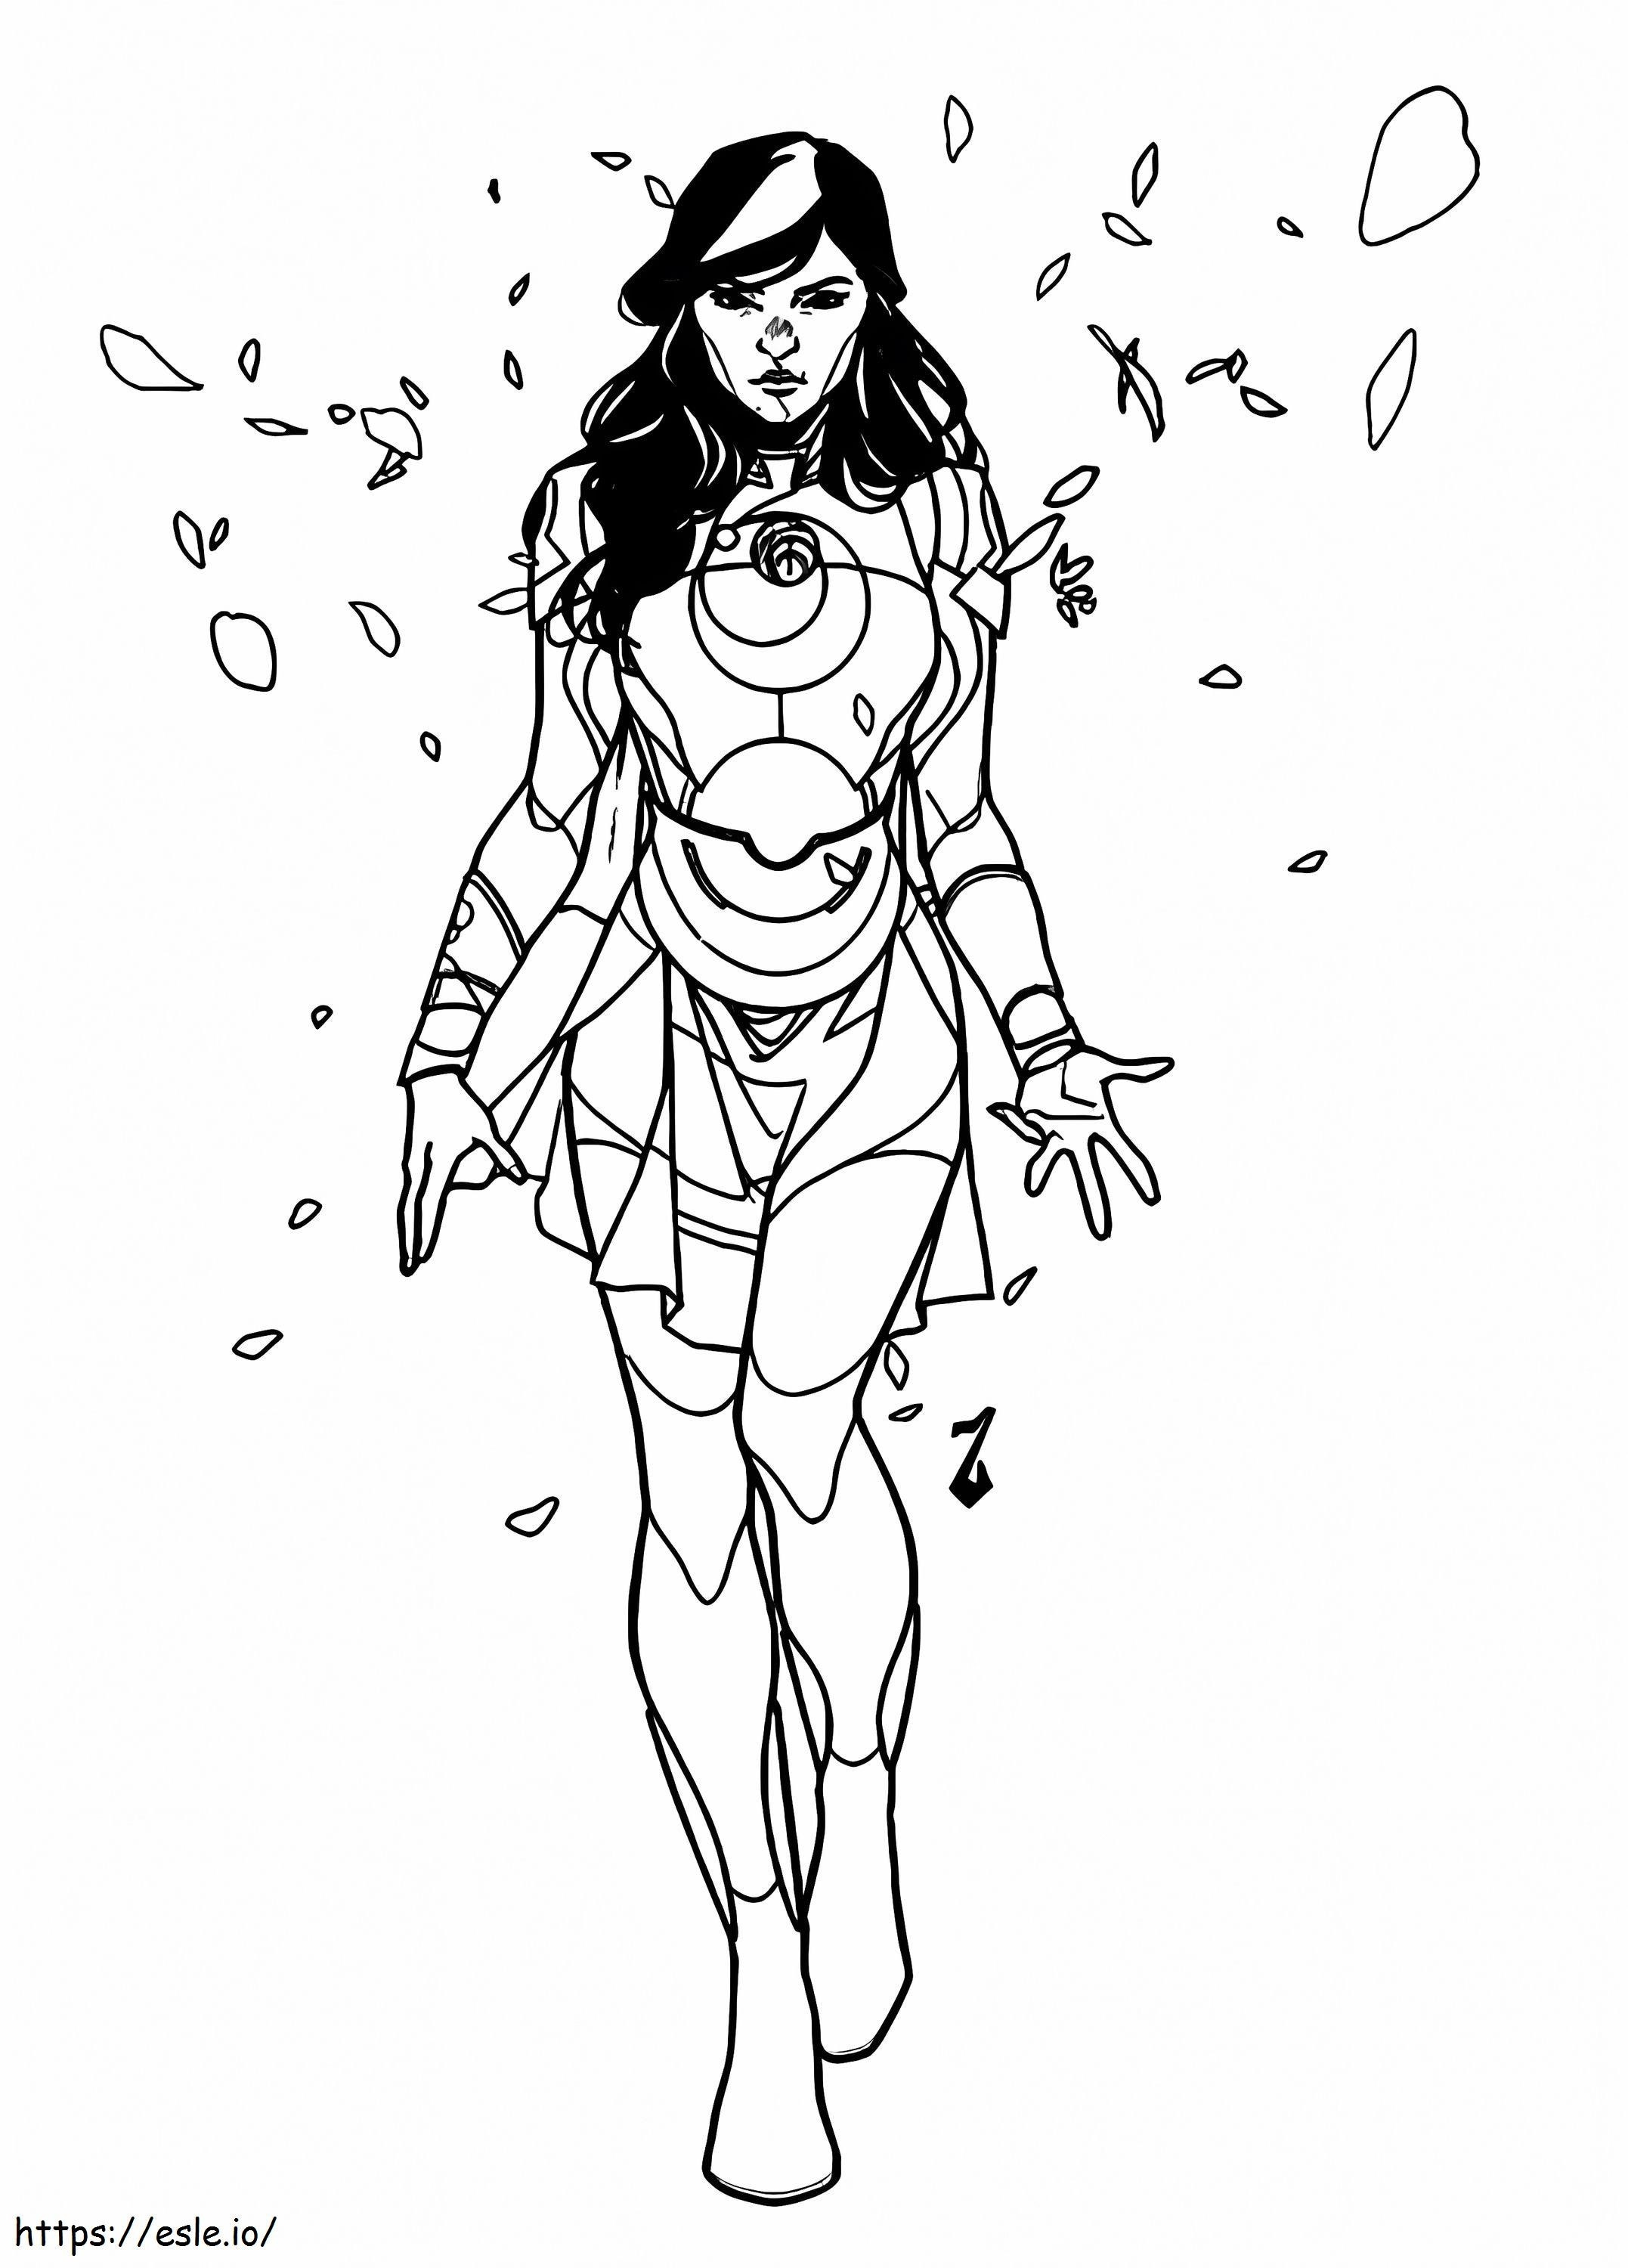 Eternals Sersi coloring page